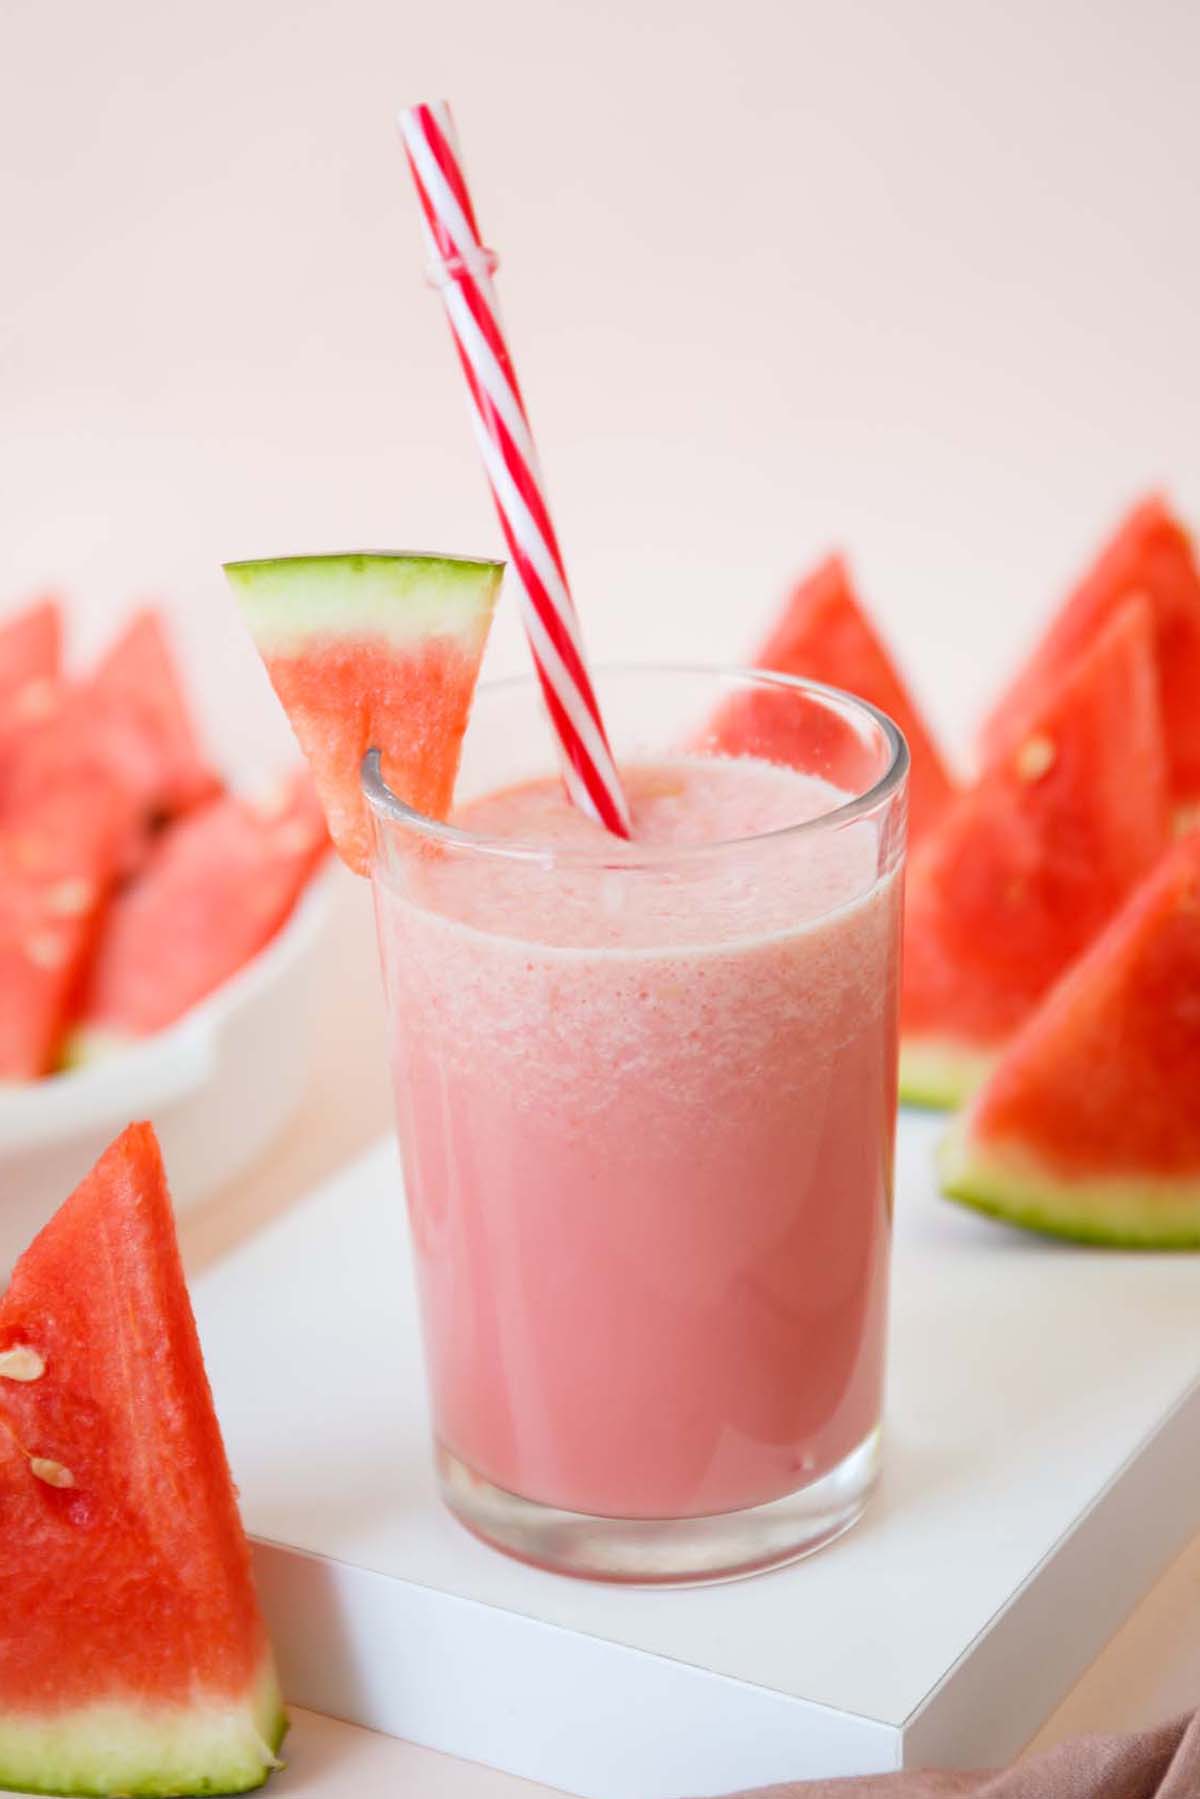 Watermelon milkshake in a glass with a red straw.